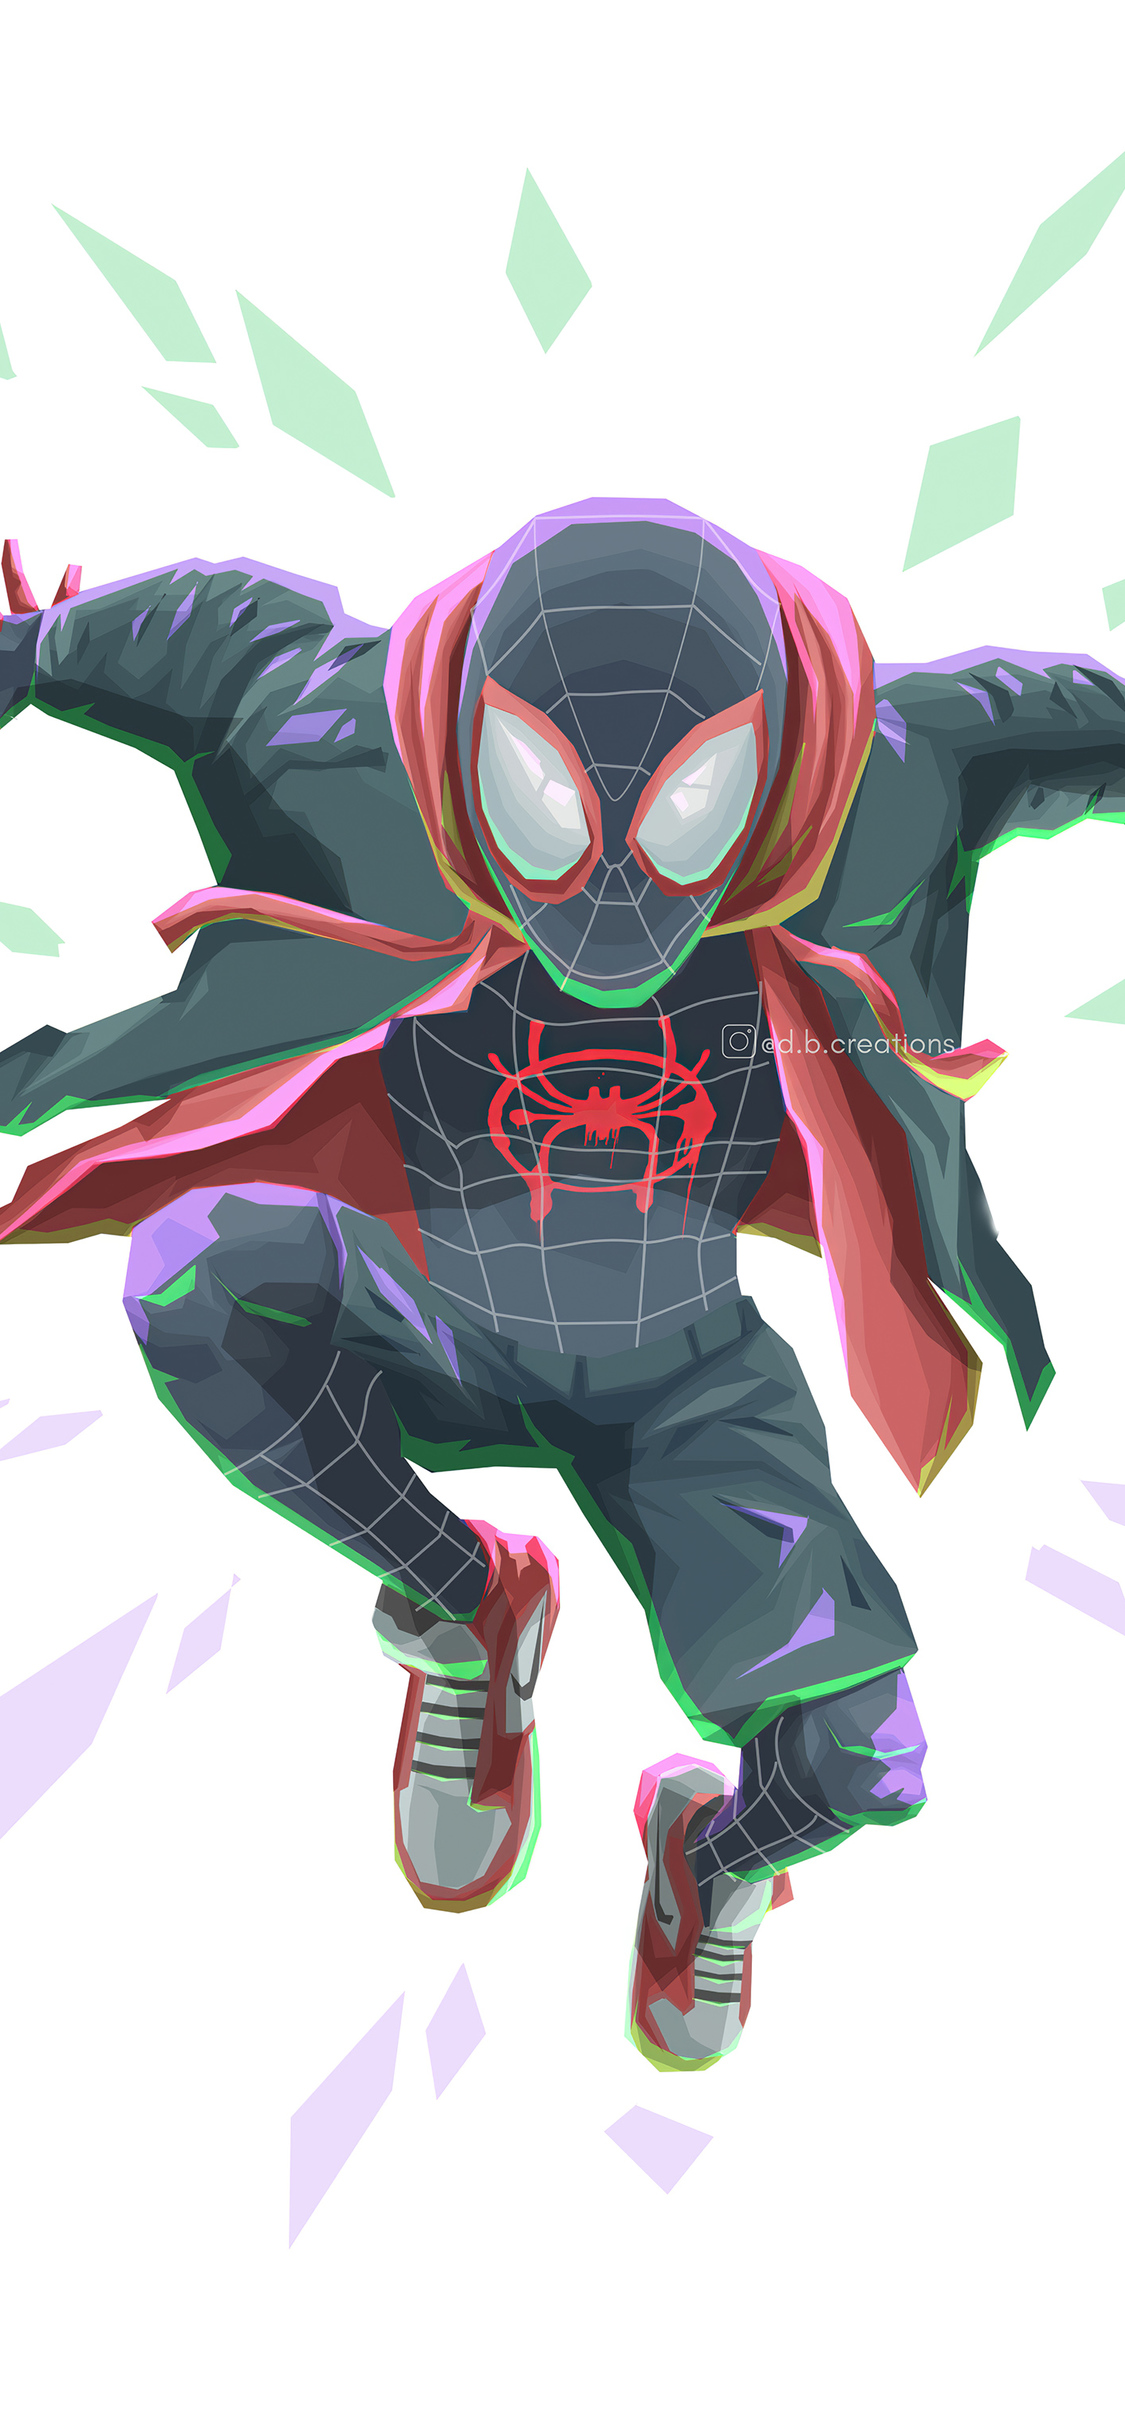 spiderman wallpaper hd,cartoon,cool,anime,fictional character,action figure